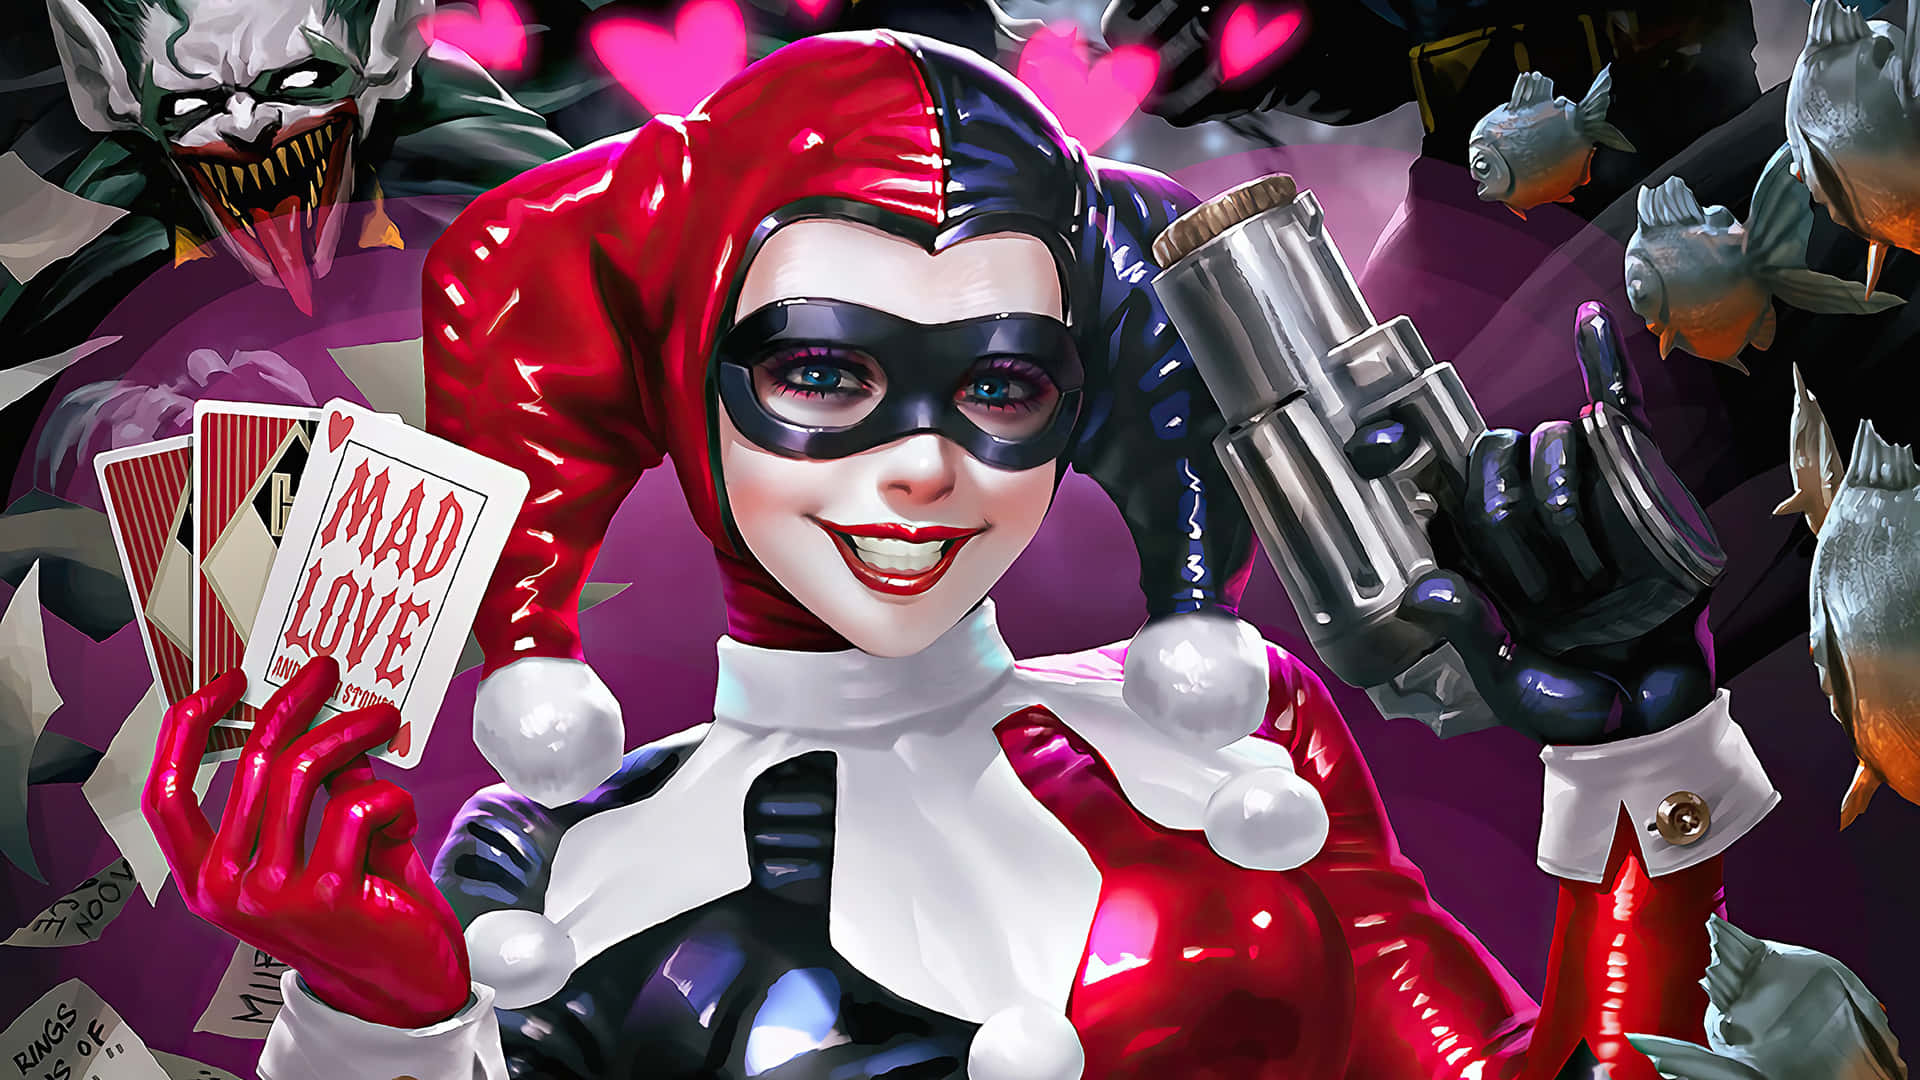 [100+] Classic Harley Quinn Wallpapers | Wallpapers.com